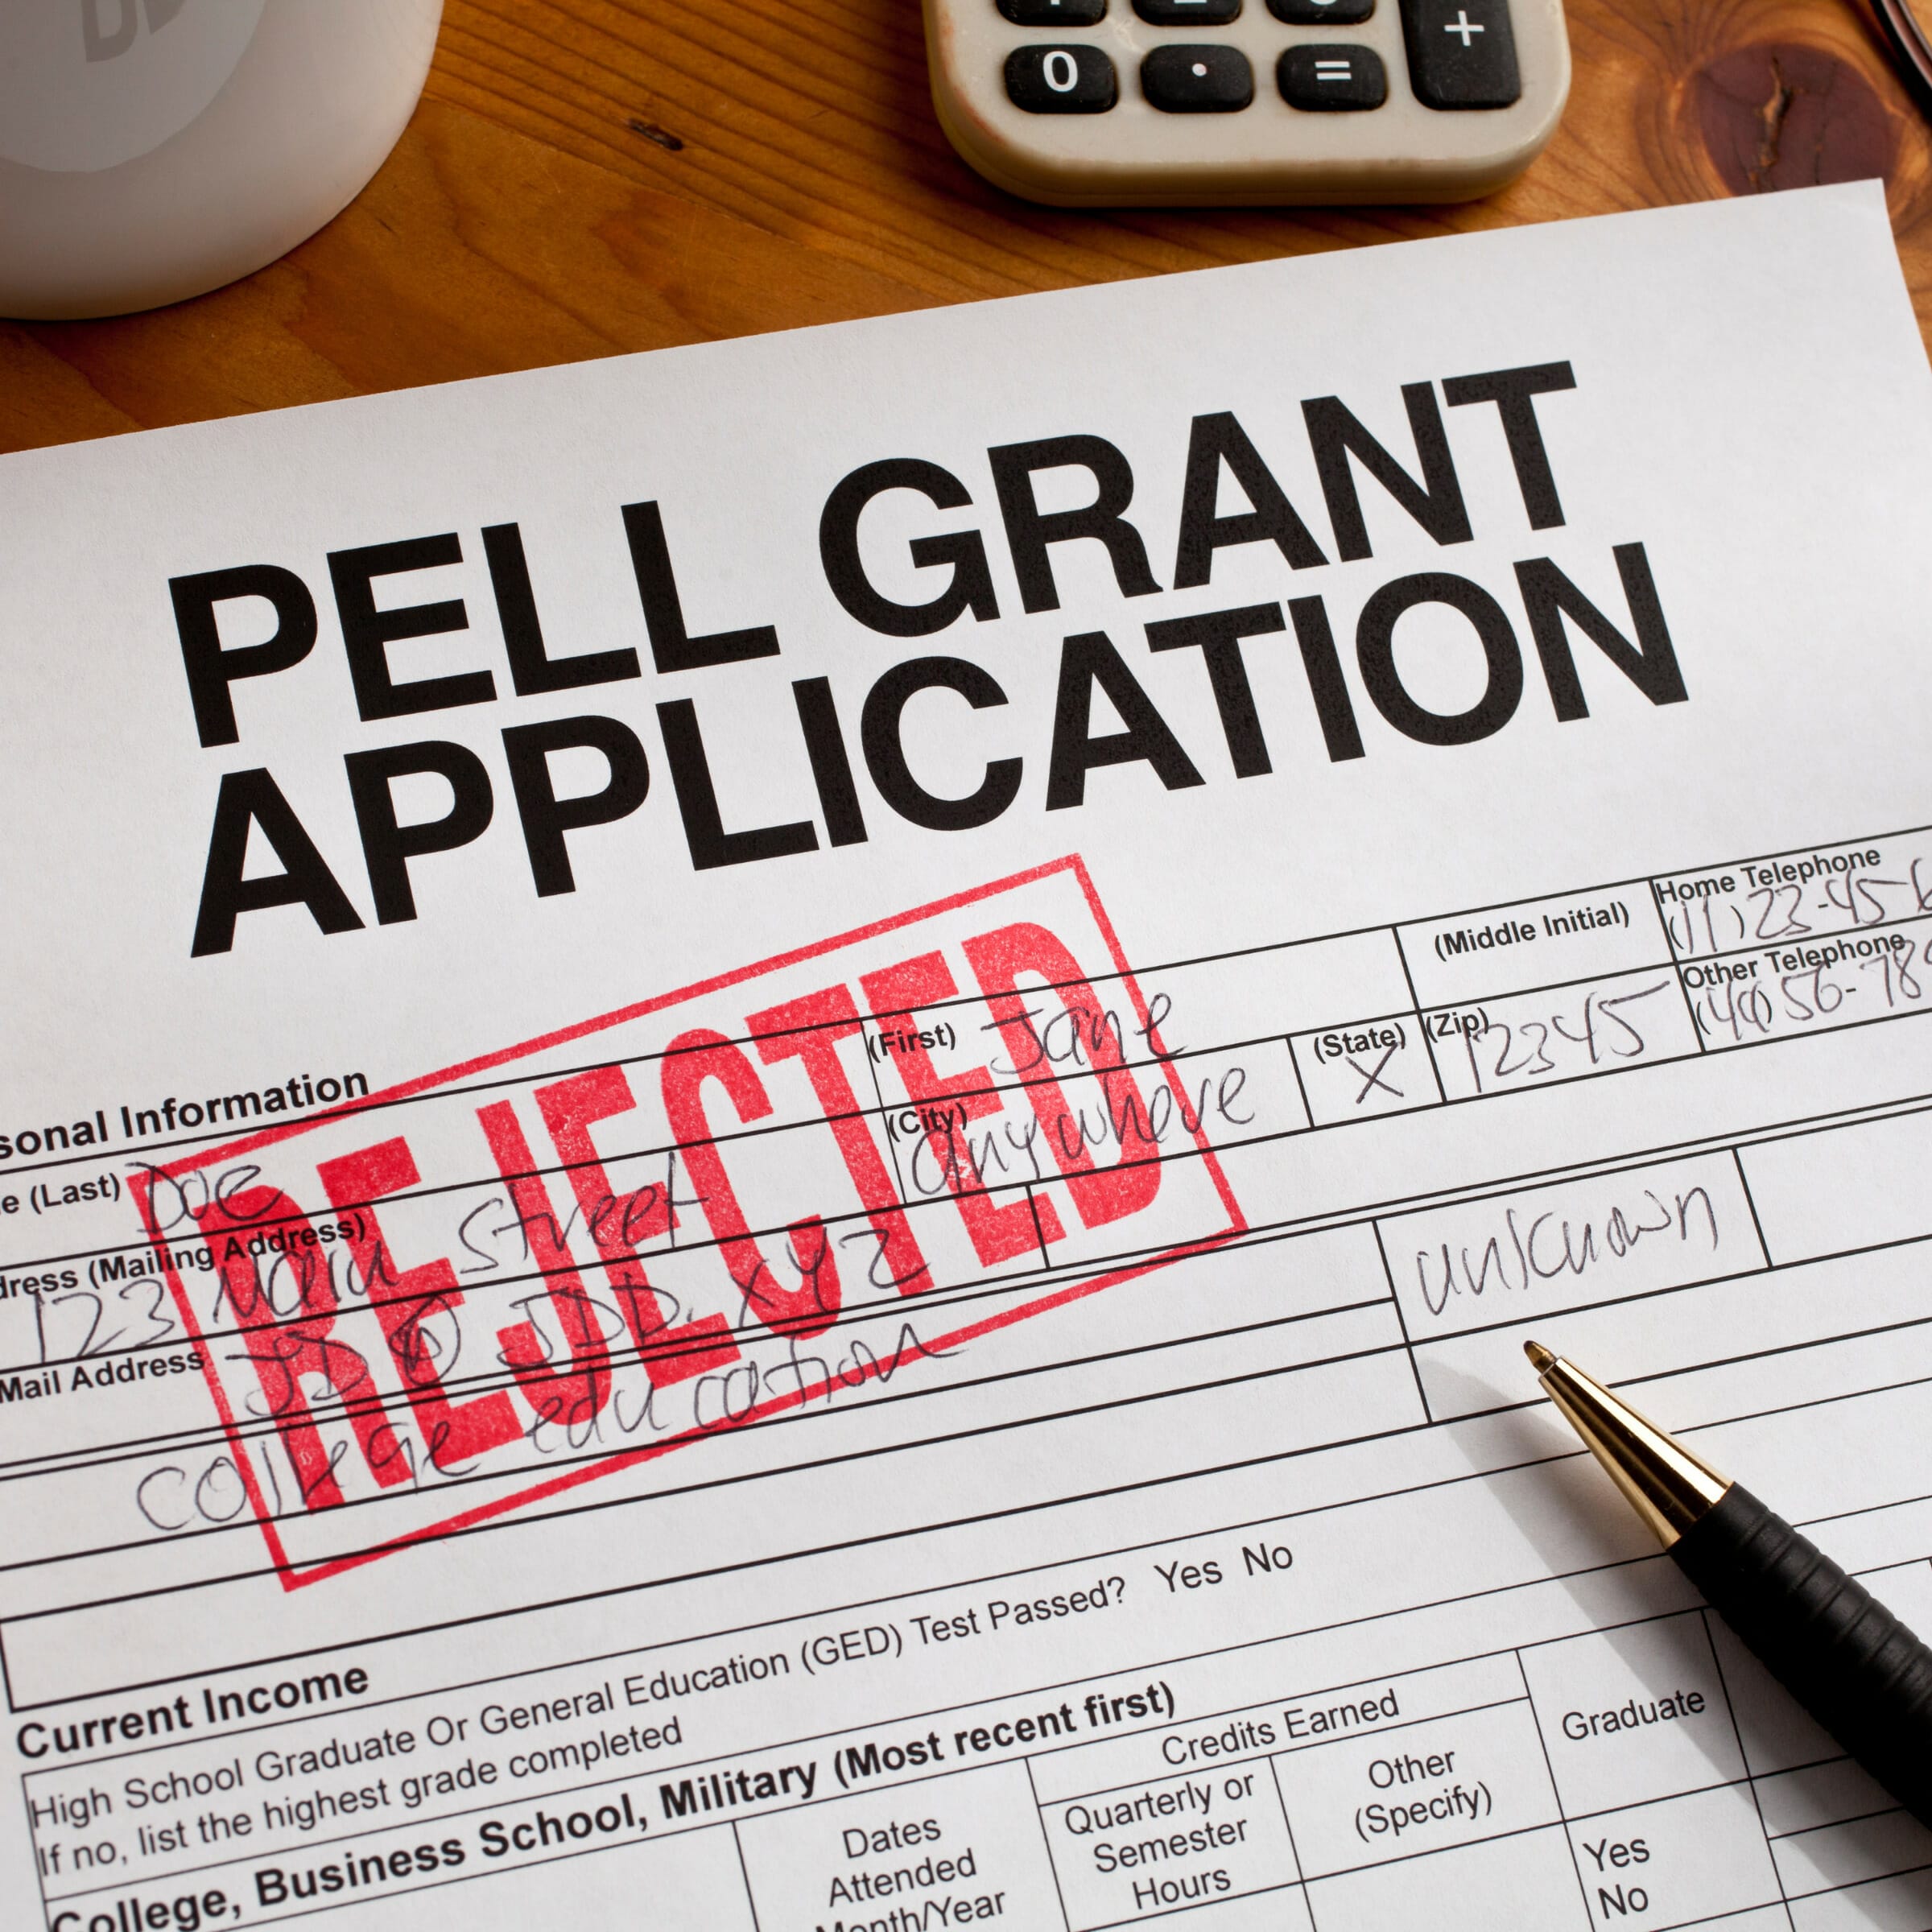 Image of a denied Pell Grant Application